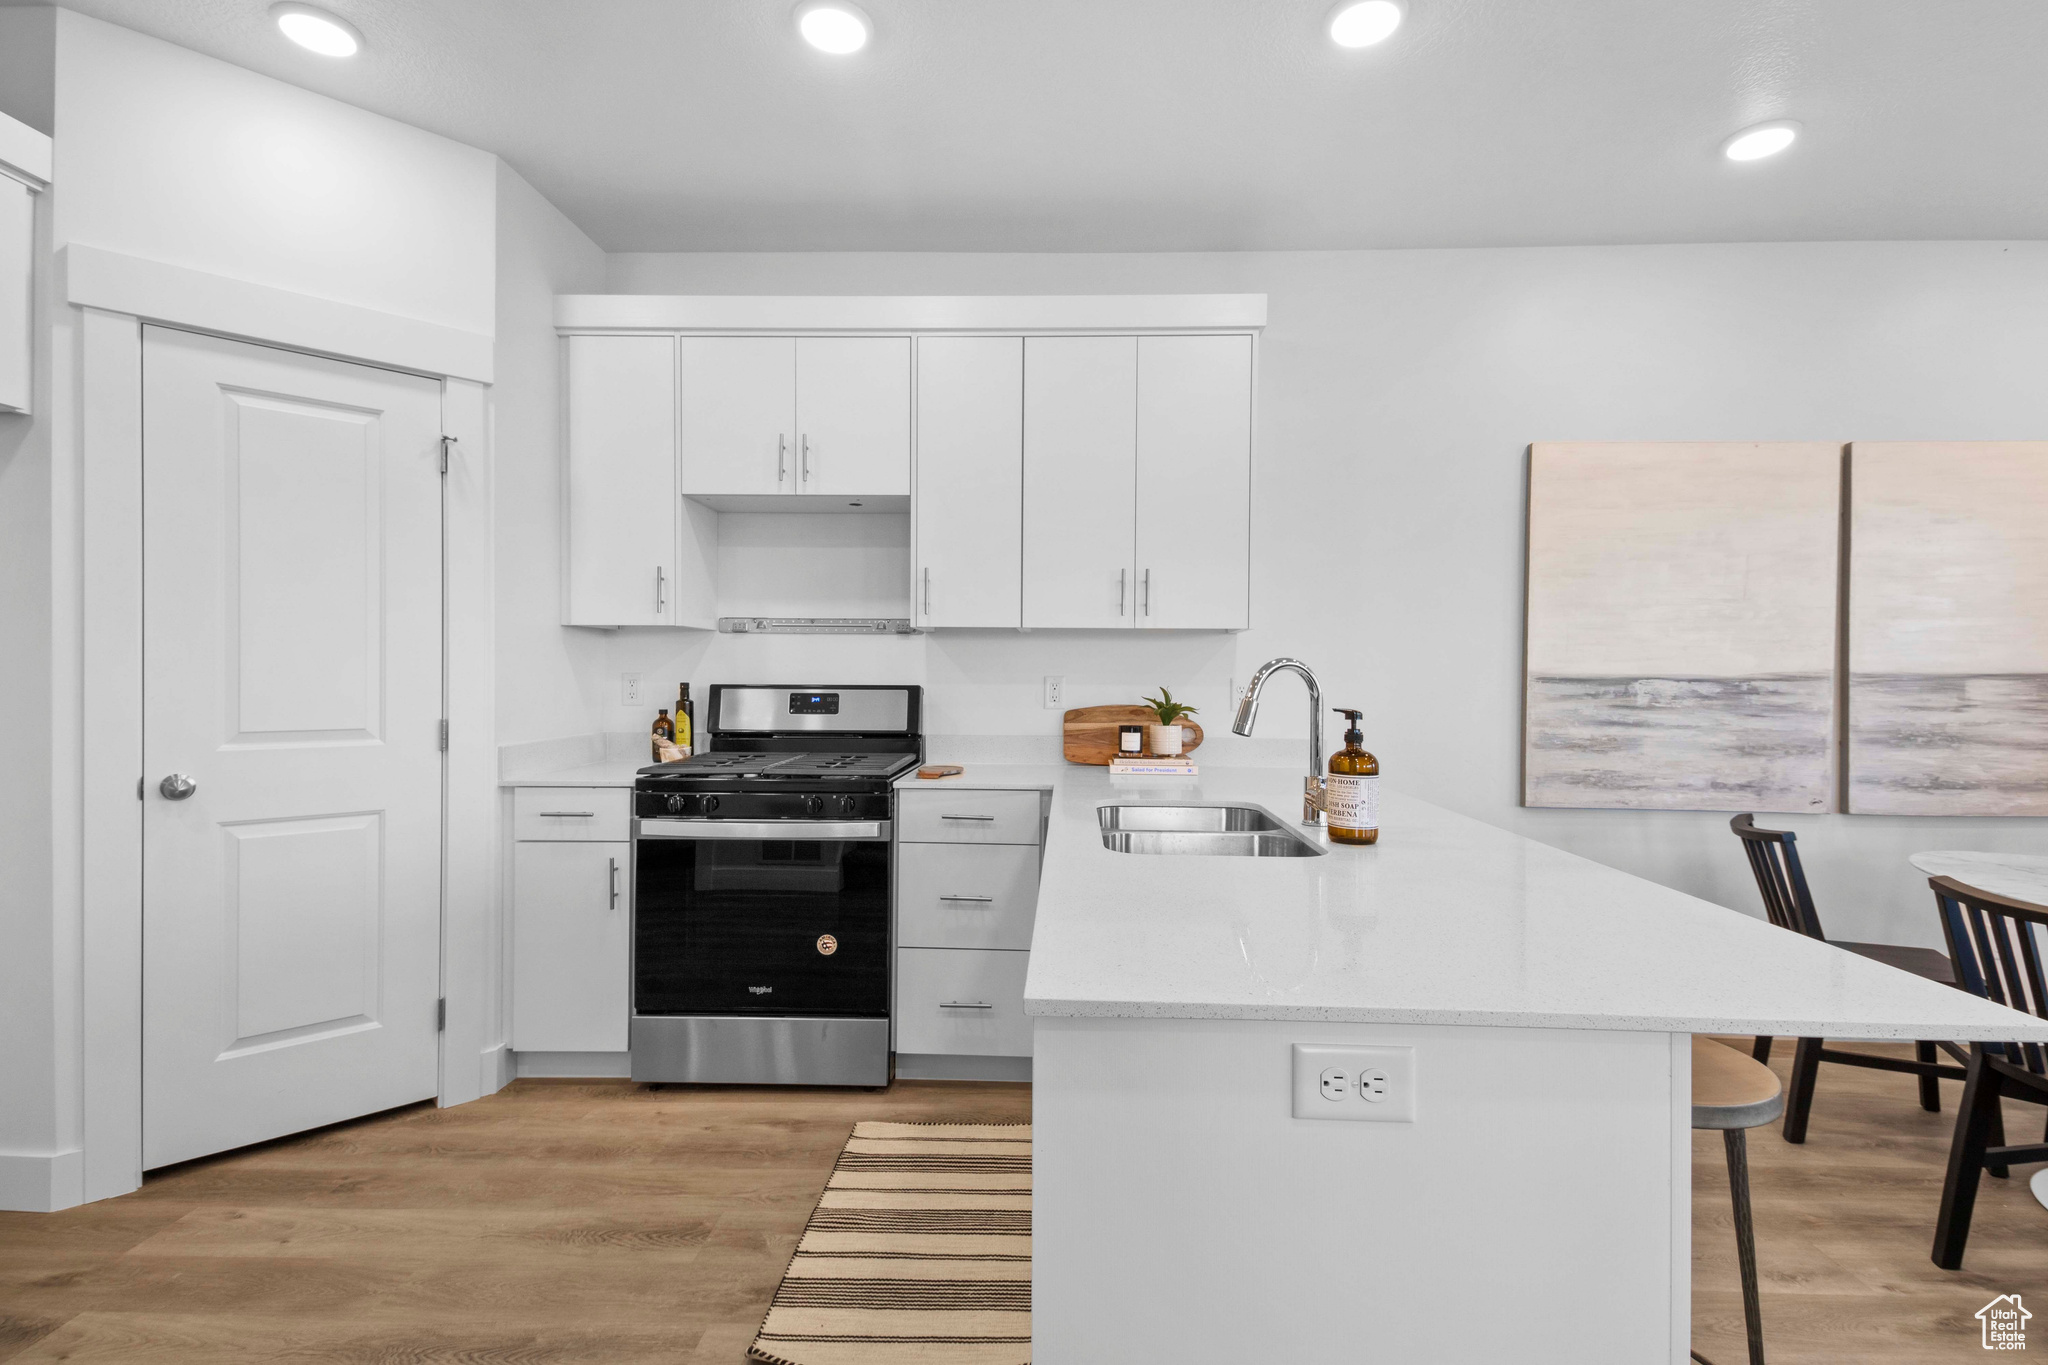 Kitchen with stainless steel range with gas stovetop, a breakfast bar, white cabinets, sink, and light hardwood / wood-style floors